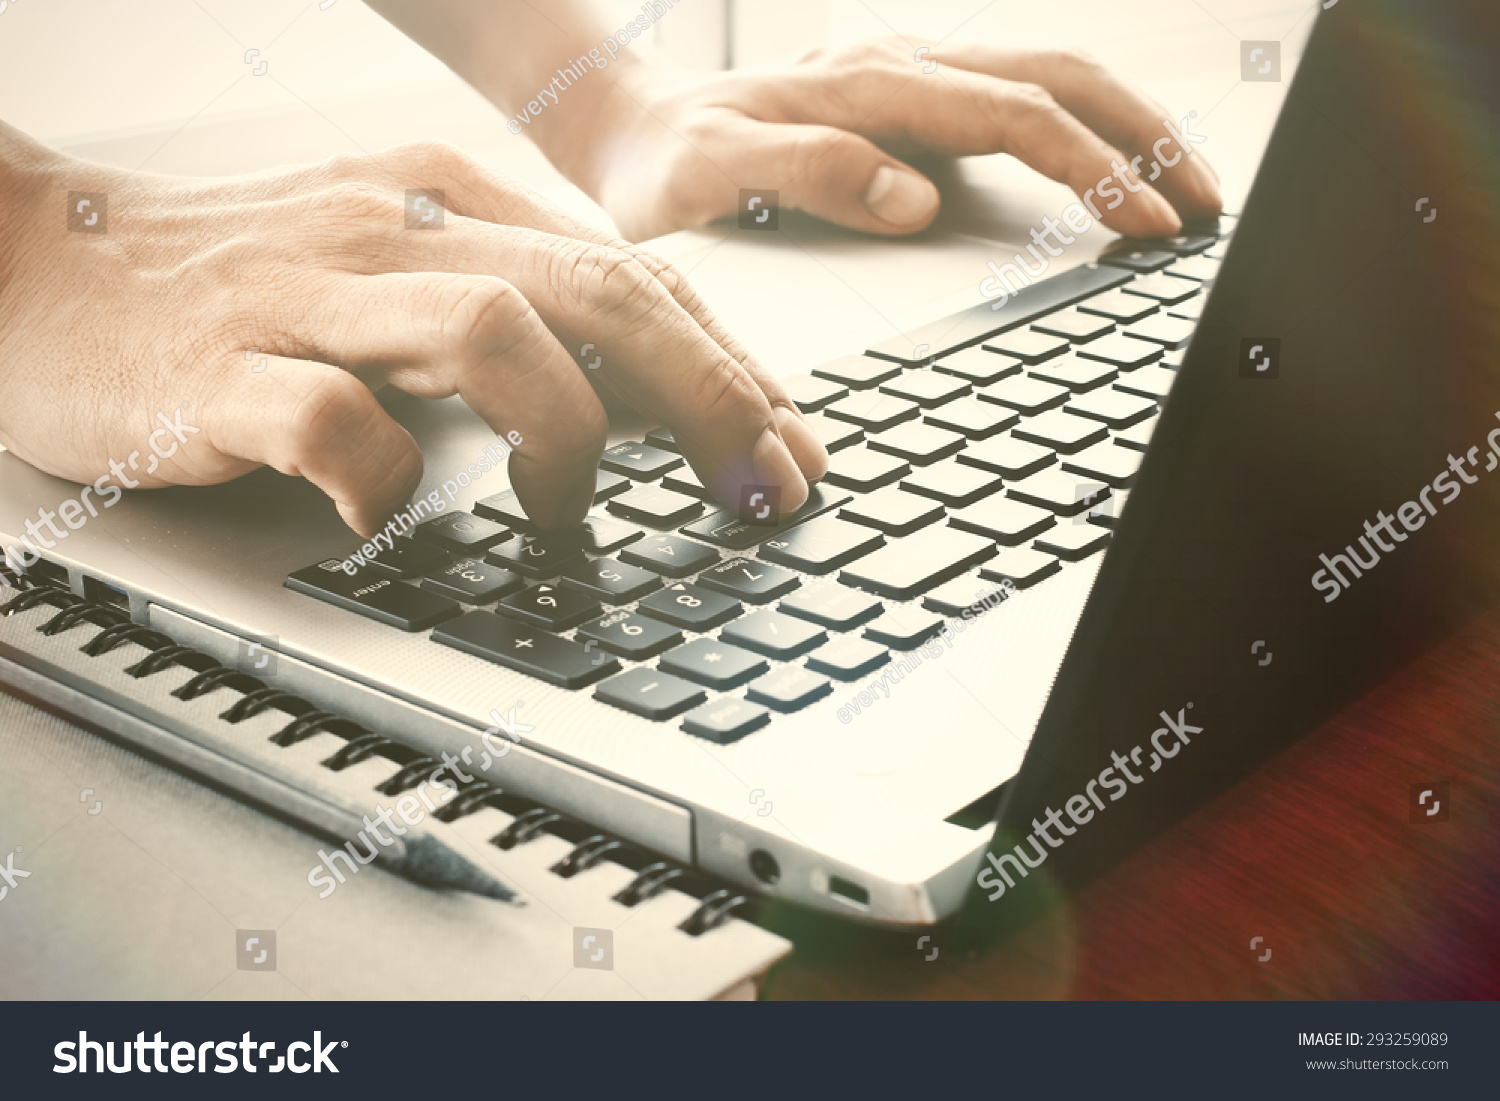 designer hand working with digital tablet and laptop and notebook stack and eye glass on wooden desk in office #293259089